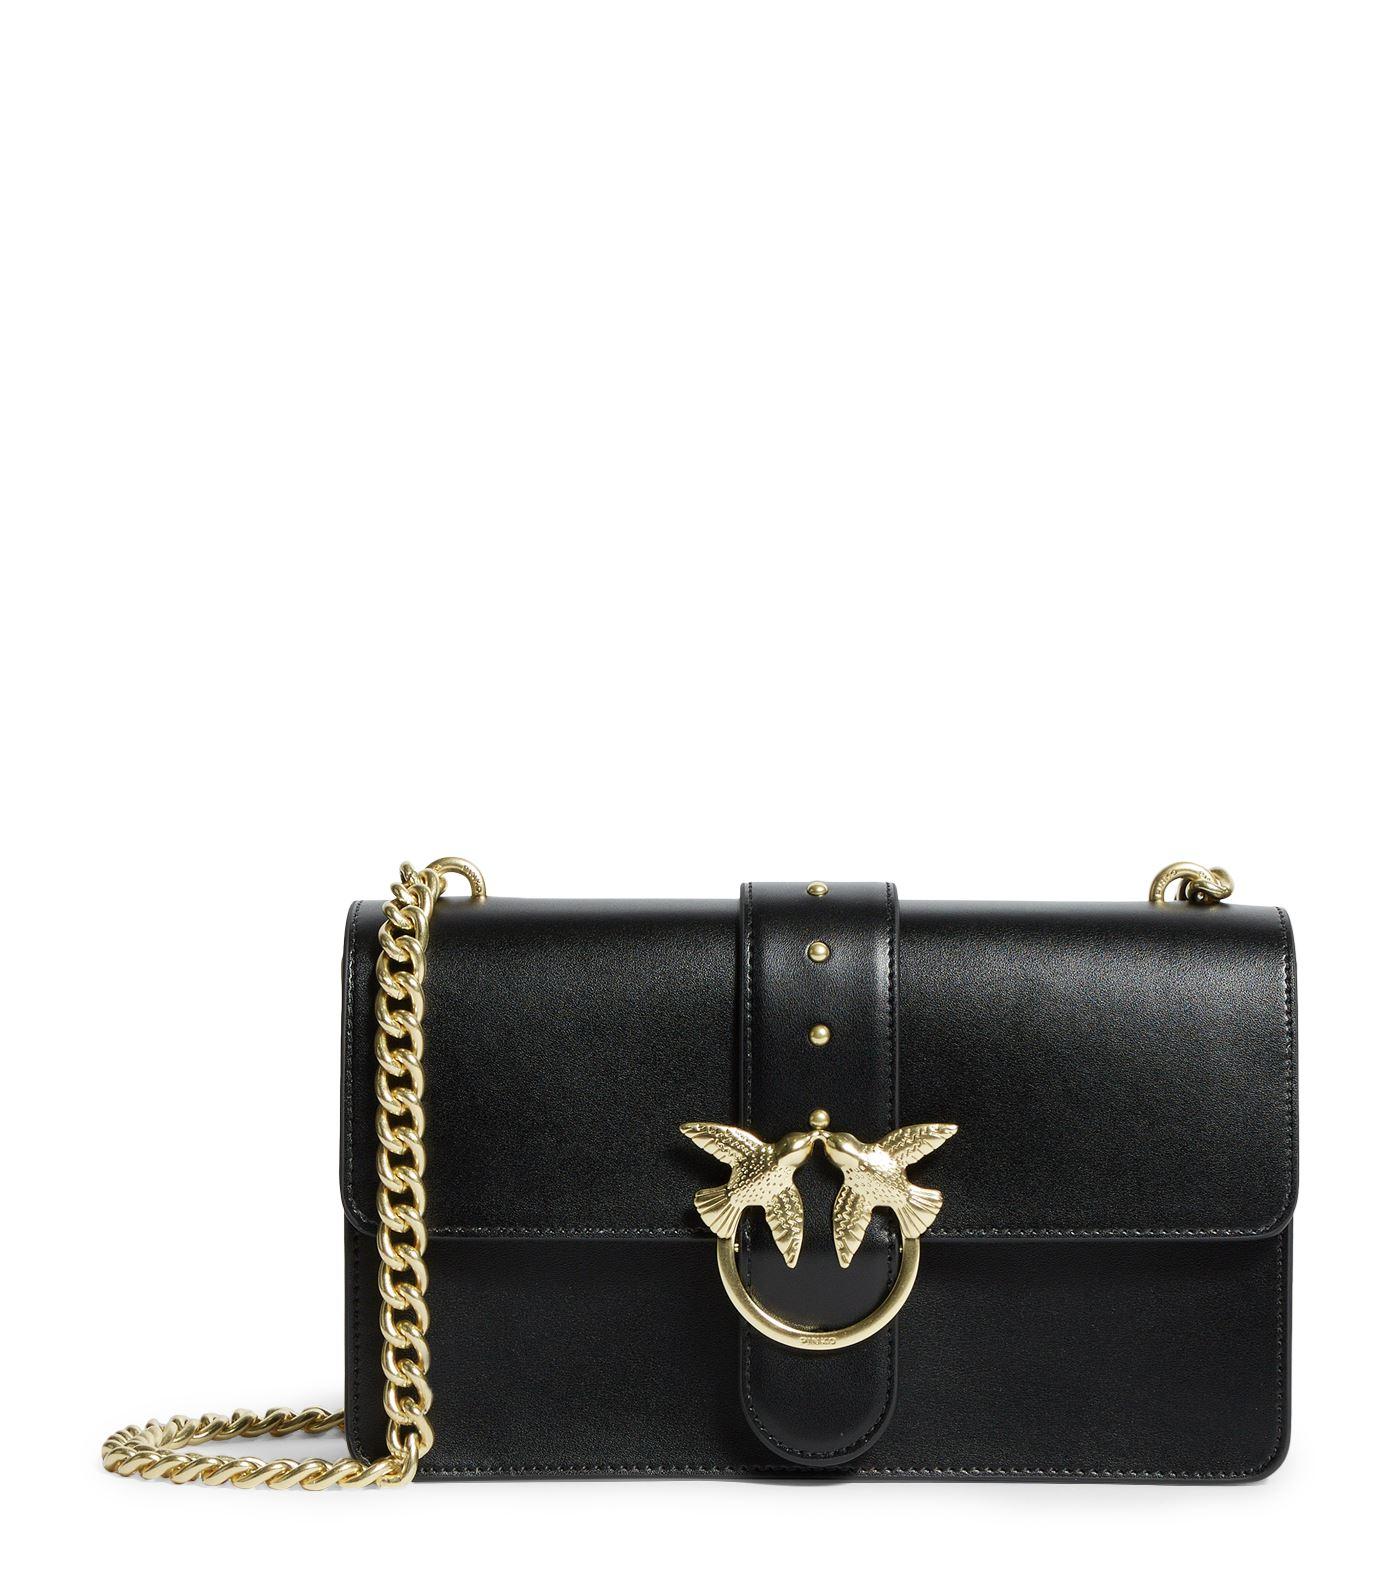 Pinko Leather Love Simply Shoulder Bag in Black - Lyst